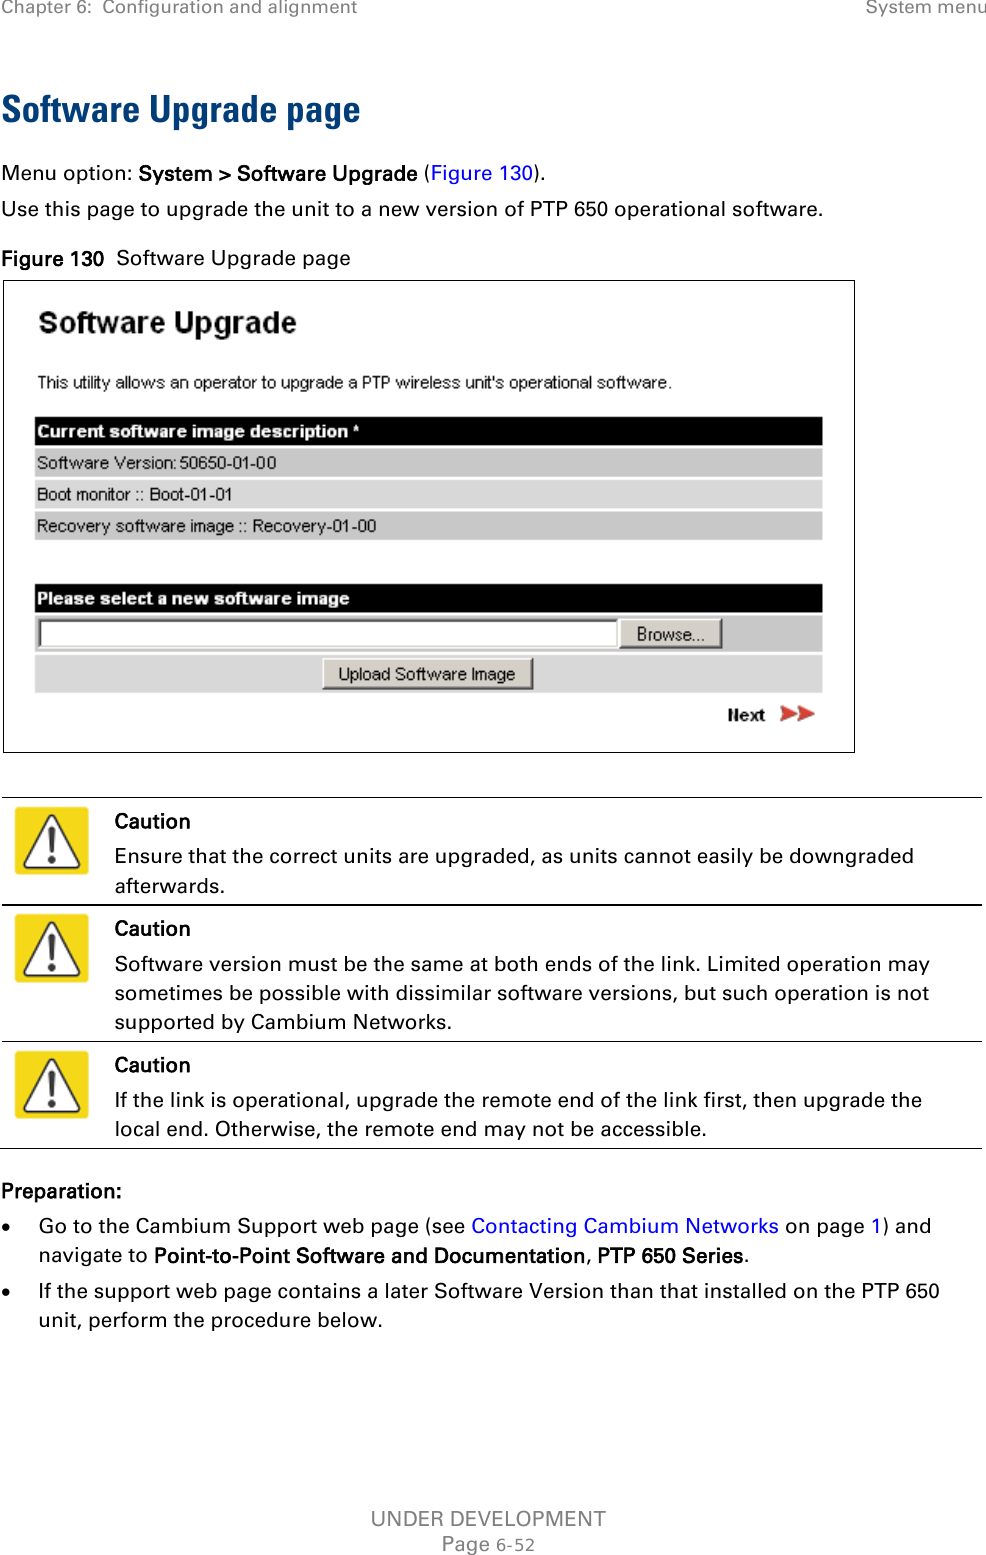 Chapter 6:  Configuration and alignment System menu  Software Upgrade page Menu option: System &gt; Software Upgrade (Figure 130). Use this page to upgrade the unit to a new version of PTP 650 operational software. Figure 130  Software Upgrade page    Caution Ensure that the correct units are upgraded, as units cannot easily be downgraded afterwards.  Caution Software version must be the same at both ends of the link. Limited operation may sometimes be possible with dissimilar software versions, but such operation is not supported by Cambium Networks.  Caution If the link is operational, upgrade the remote end of the link first, then upgrade the local end. Otherwise, the remote end may not be accessible. Preparation: • Go to the Cambium Support web page (see Contacting Cambium Networks on page 1) and navigate to Point-to-Point Software and Documentation, PTP 650 Series. • If the support web page contains a later Software Version than that installed on the PTP 650 unit, perform the procedure below.   UNDER DEVELOPMENT Page 6-52 